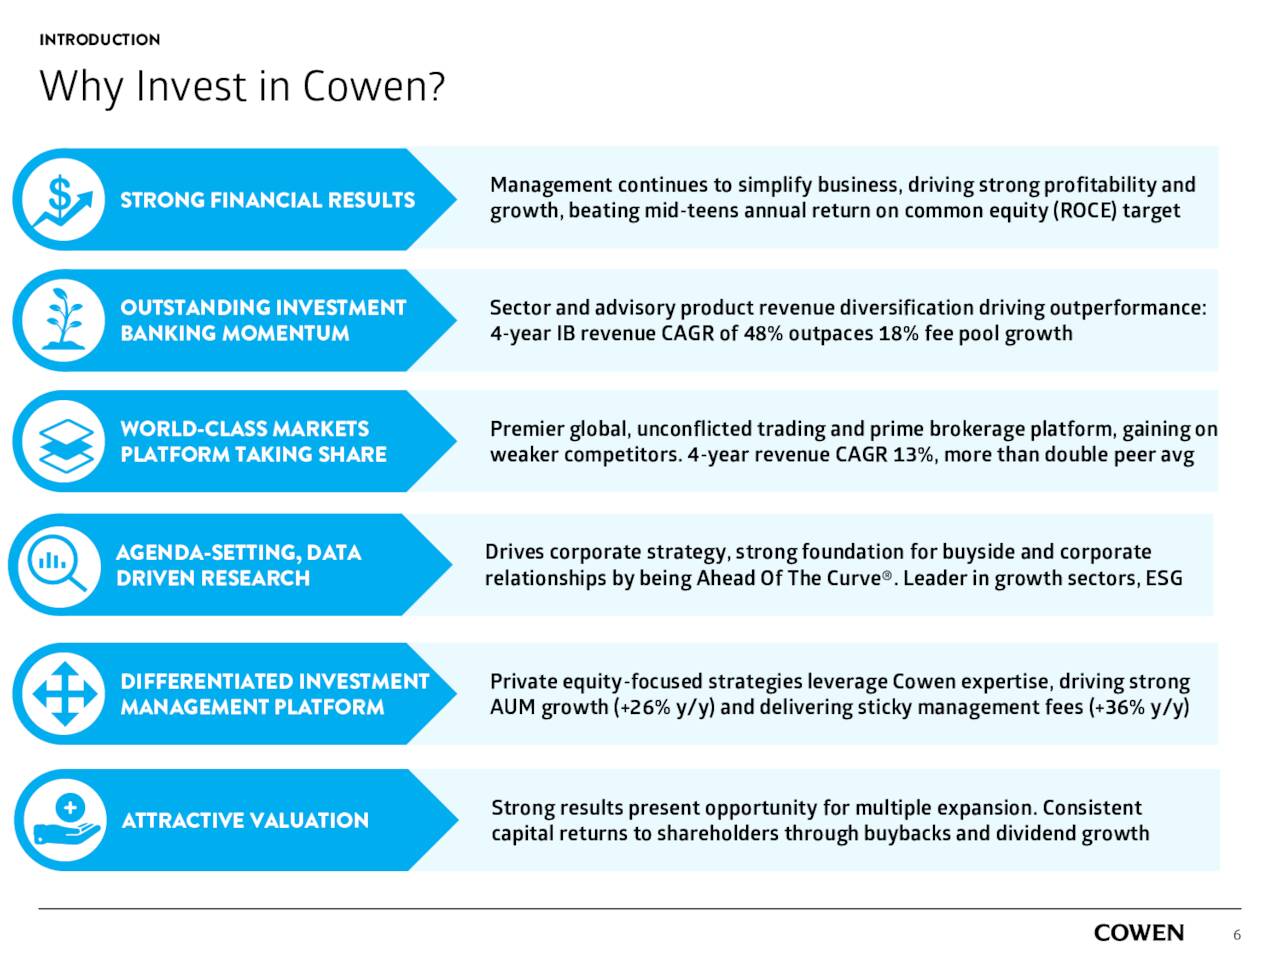 COWN - Company Overview